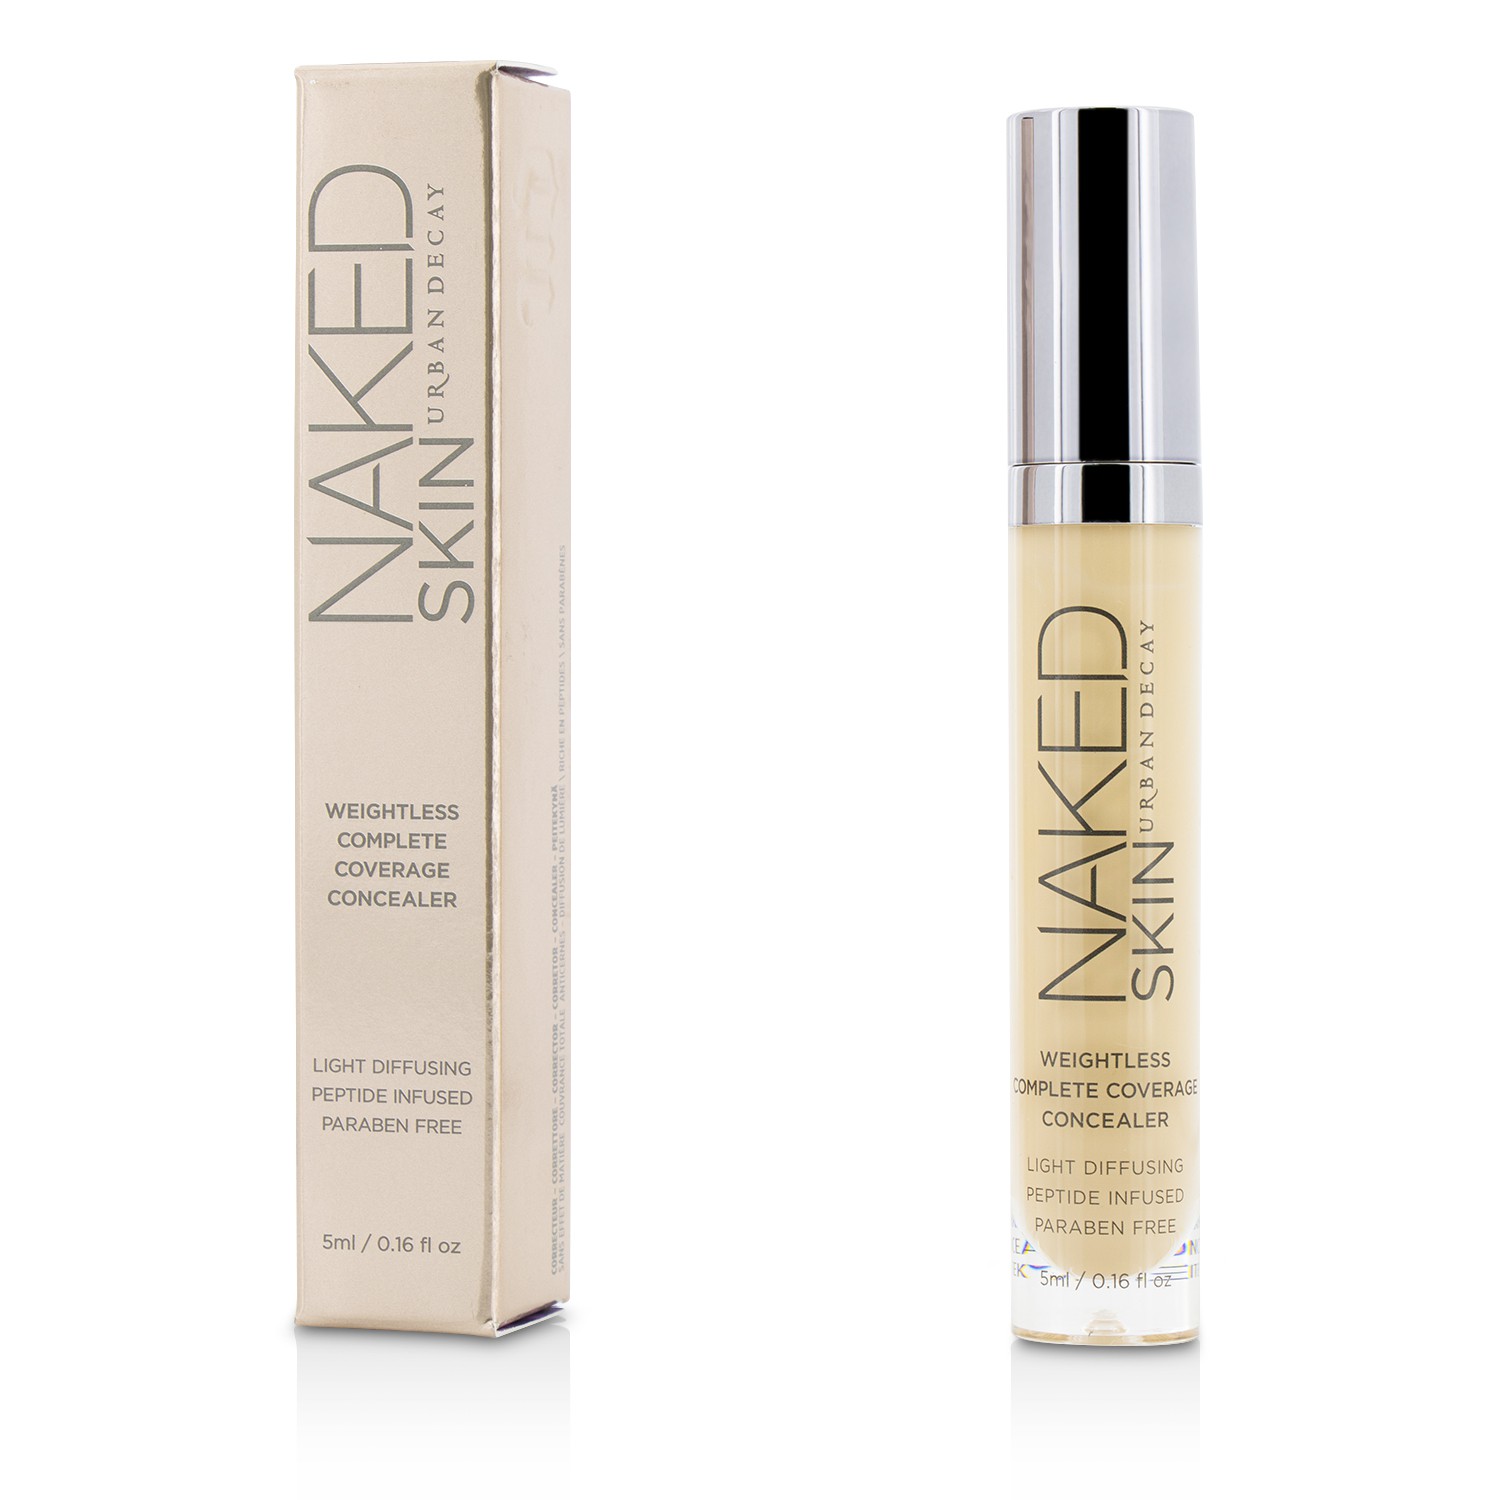 Naked Skin Weightless Complete Coverage Concealer - Light Warm Urban Decay Image